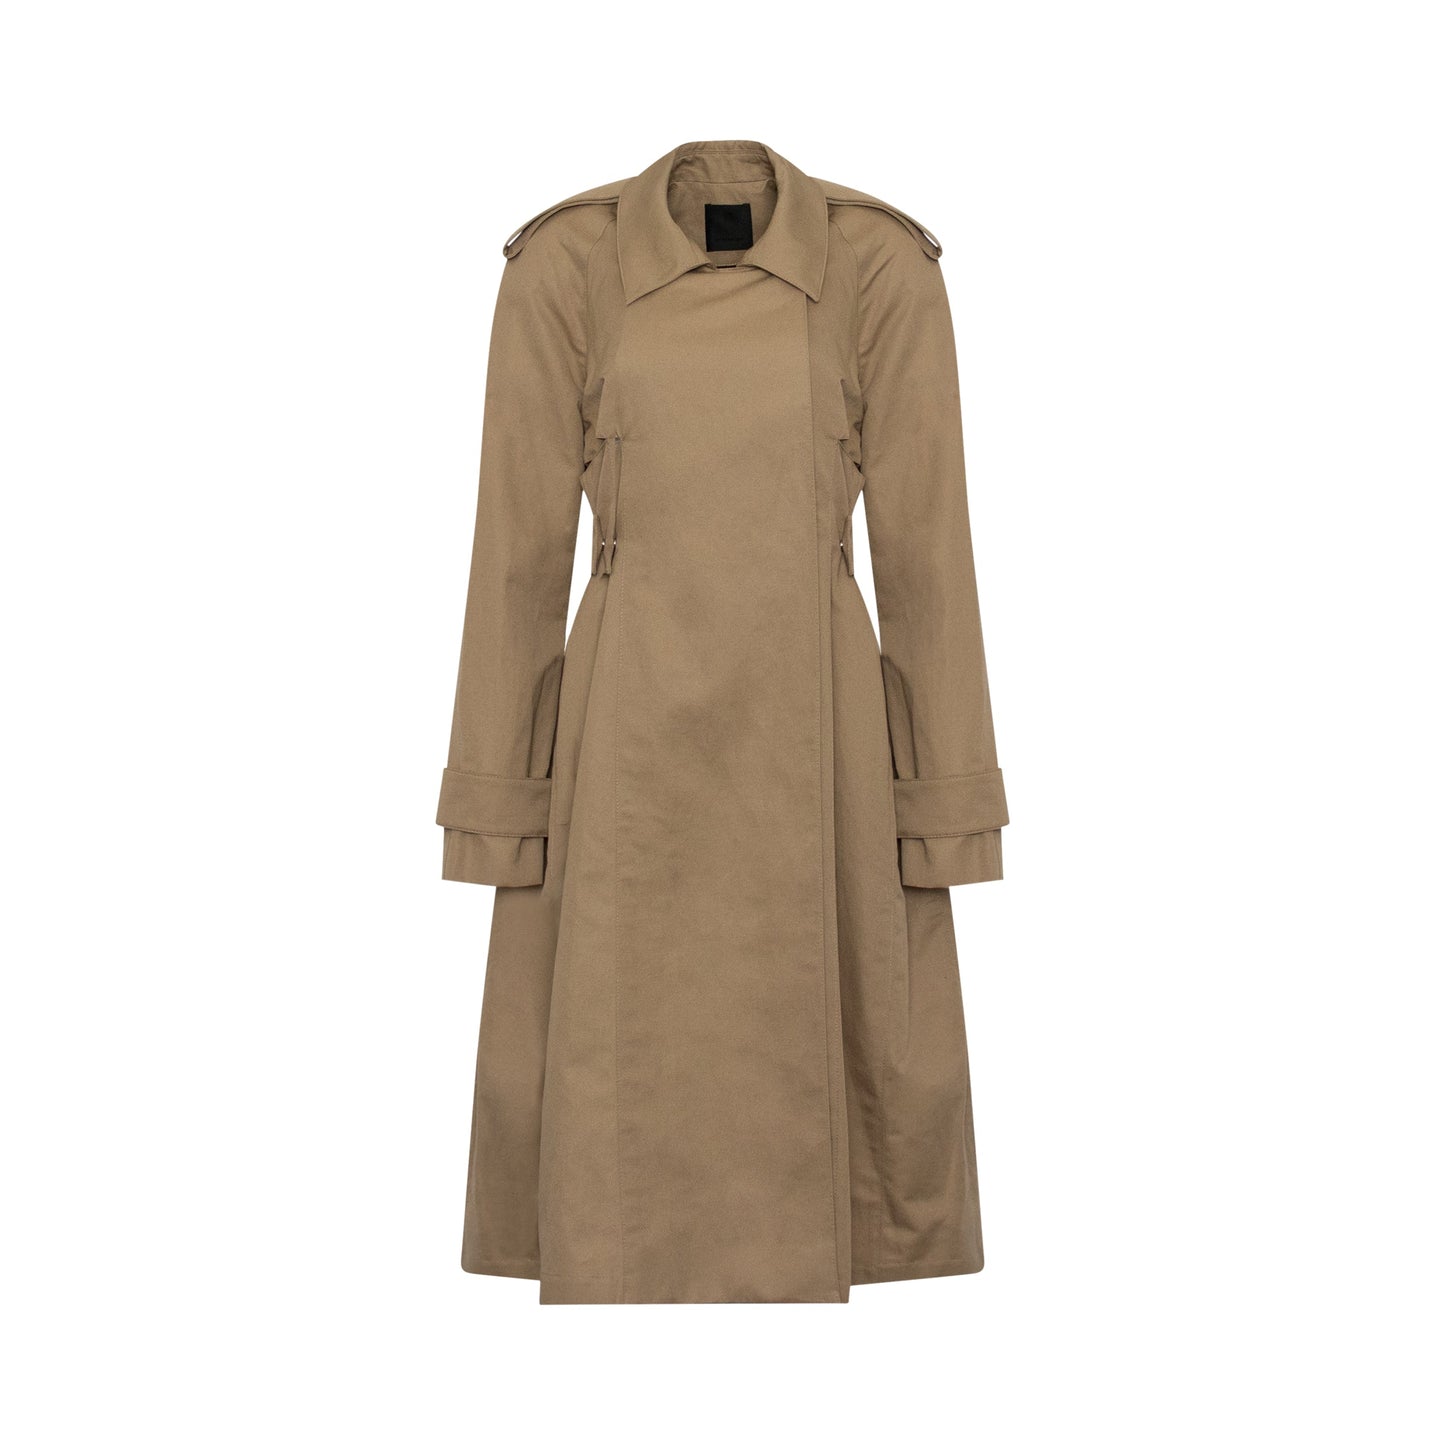 Cut Out Trench Coat in Beige